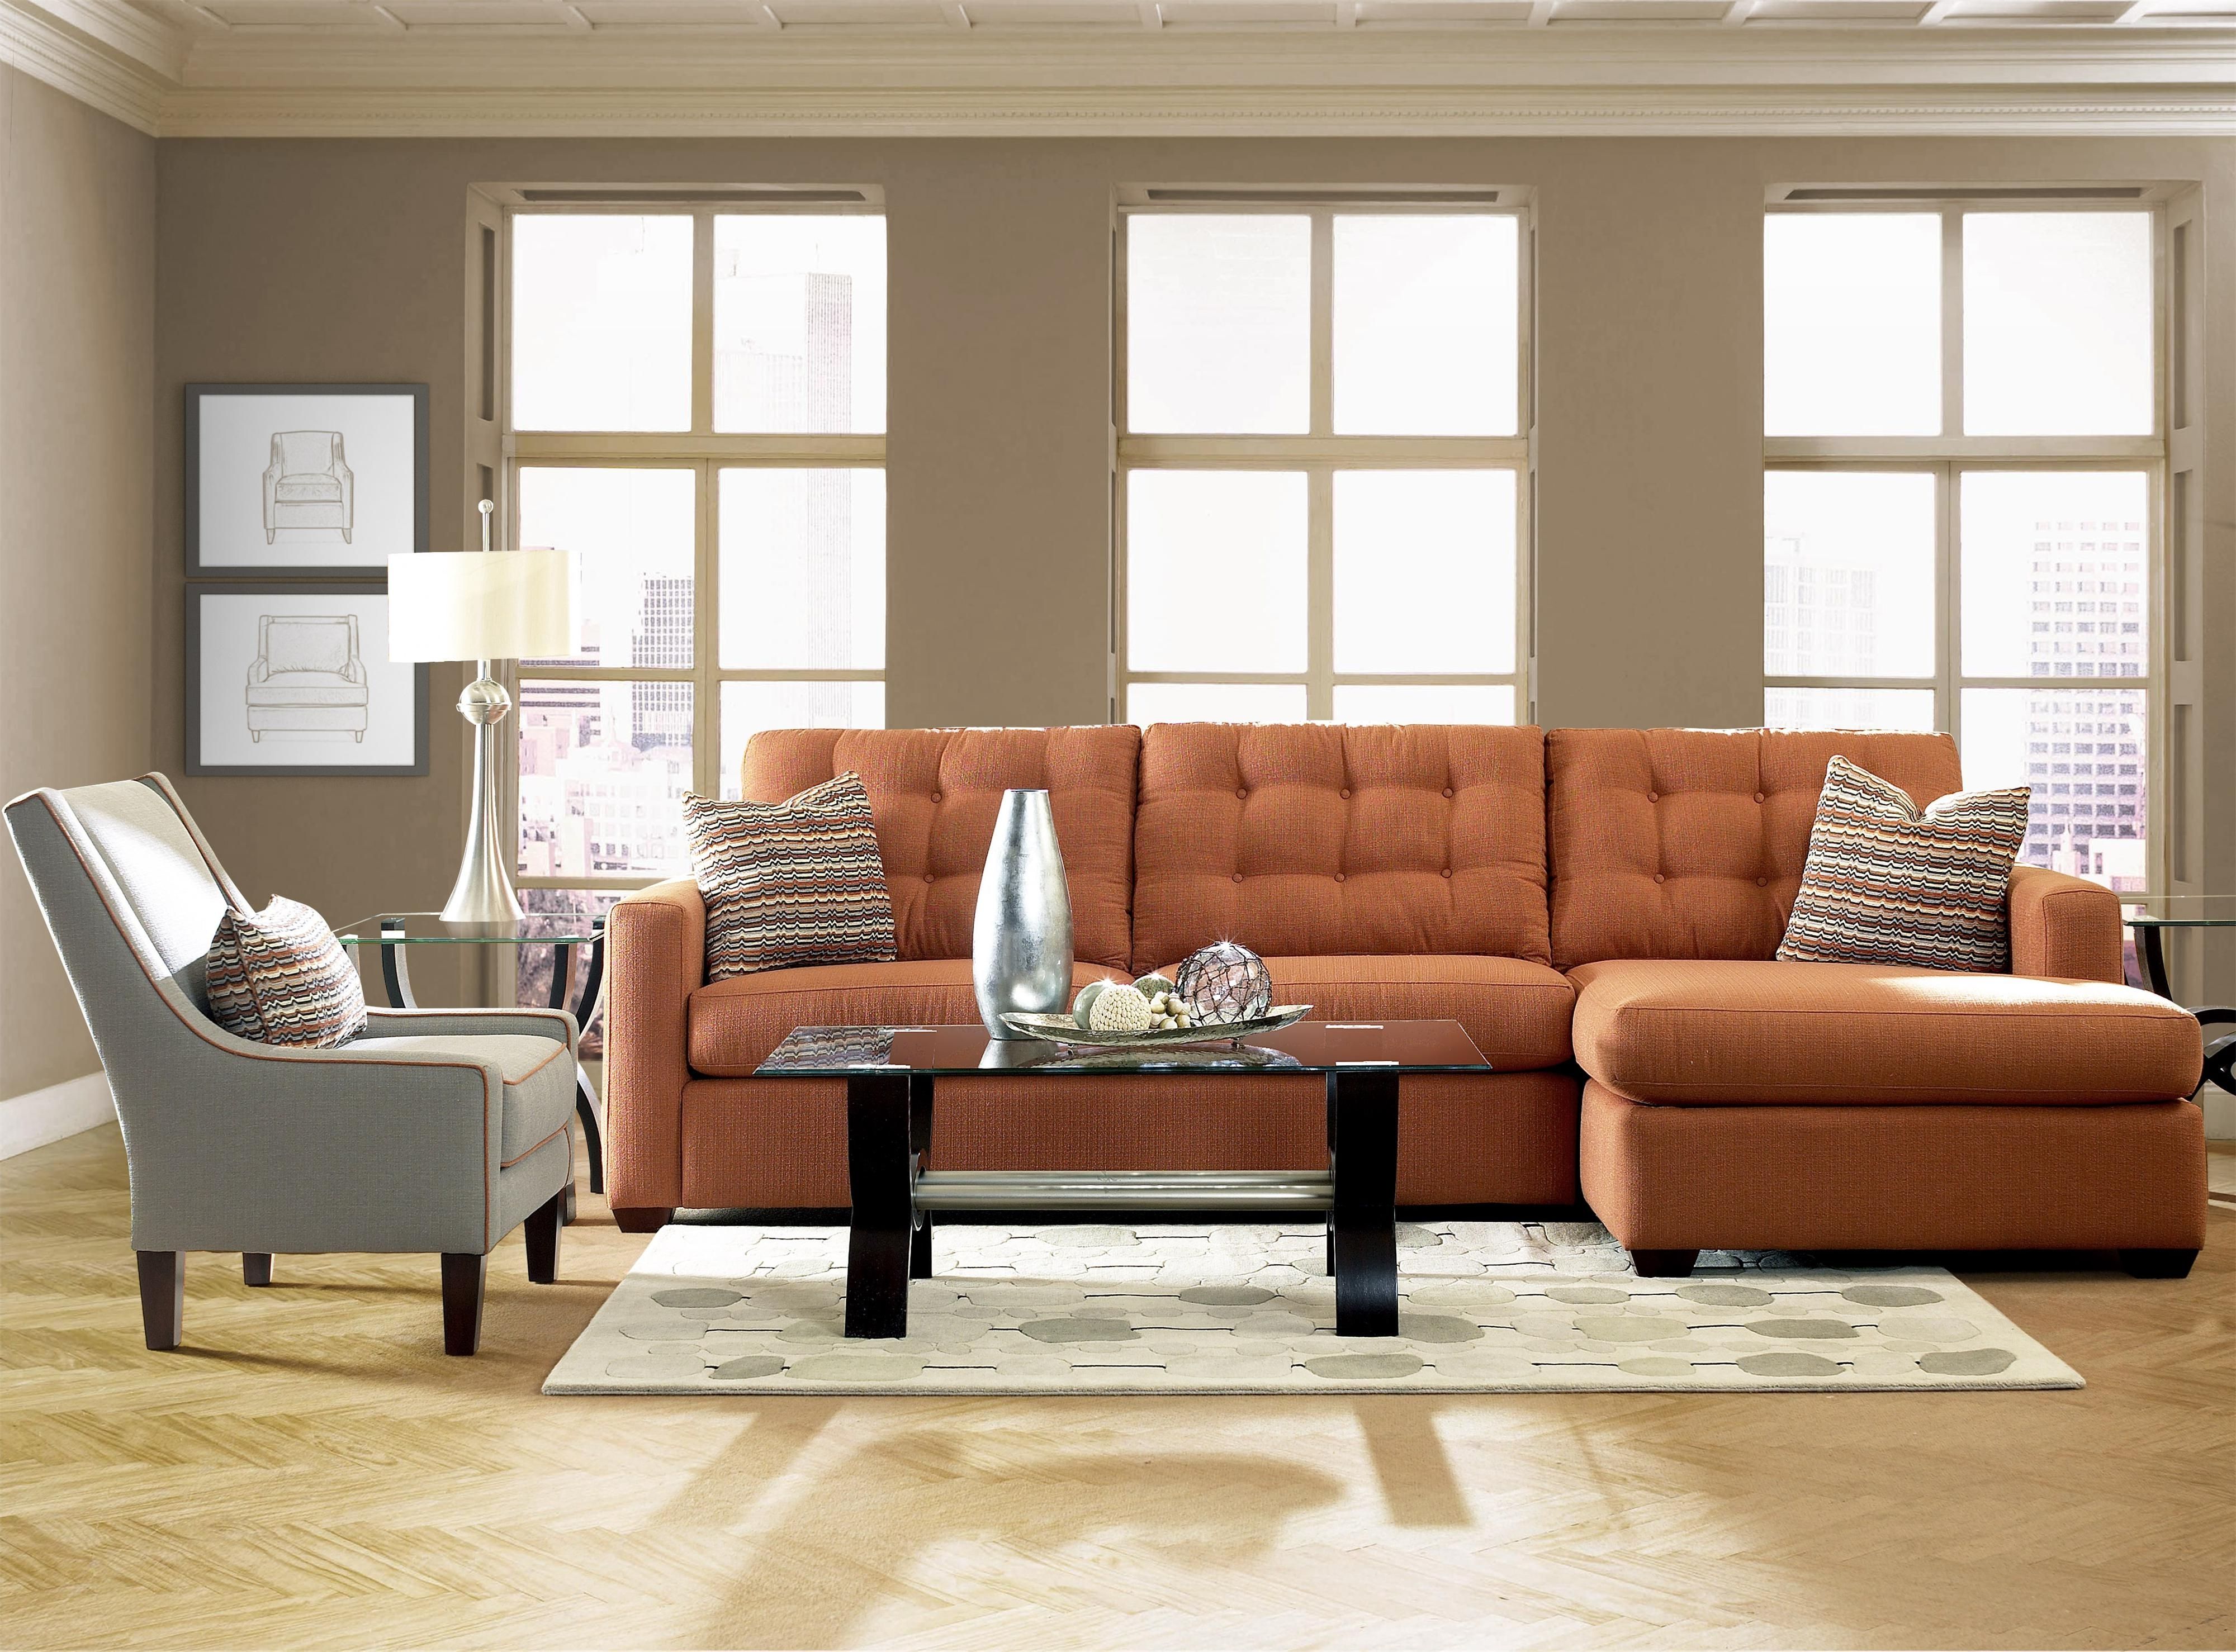 chaise living room ideas